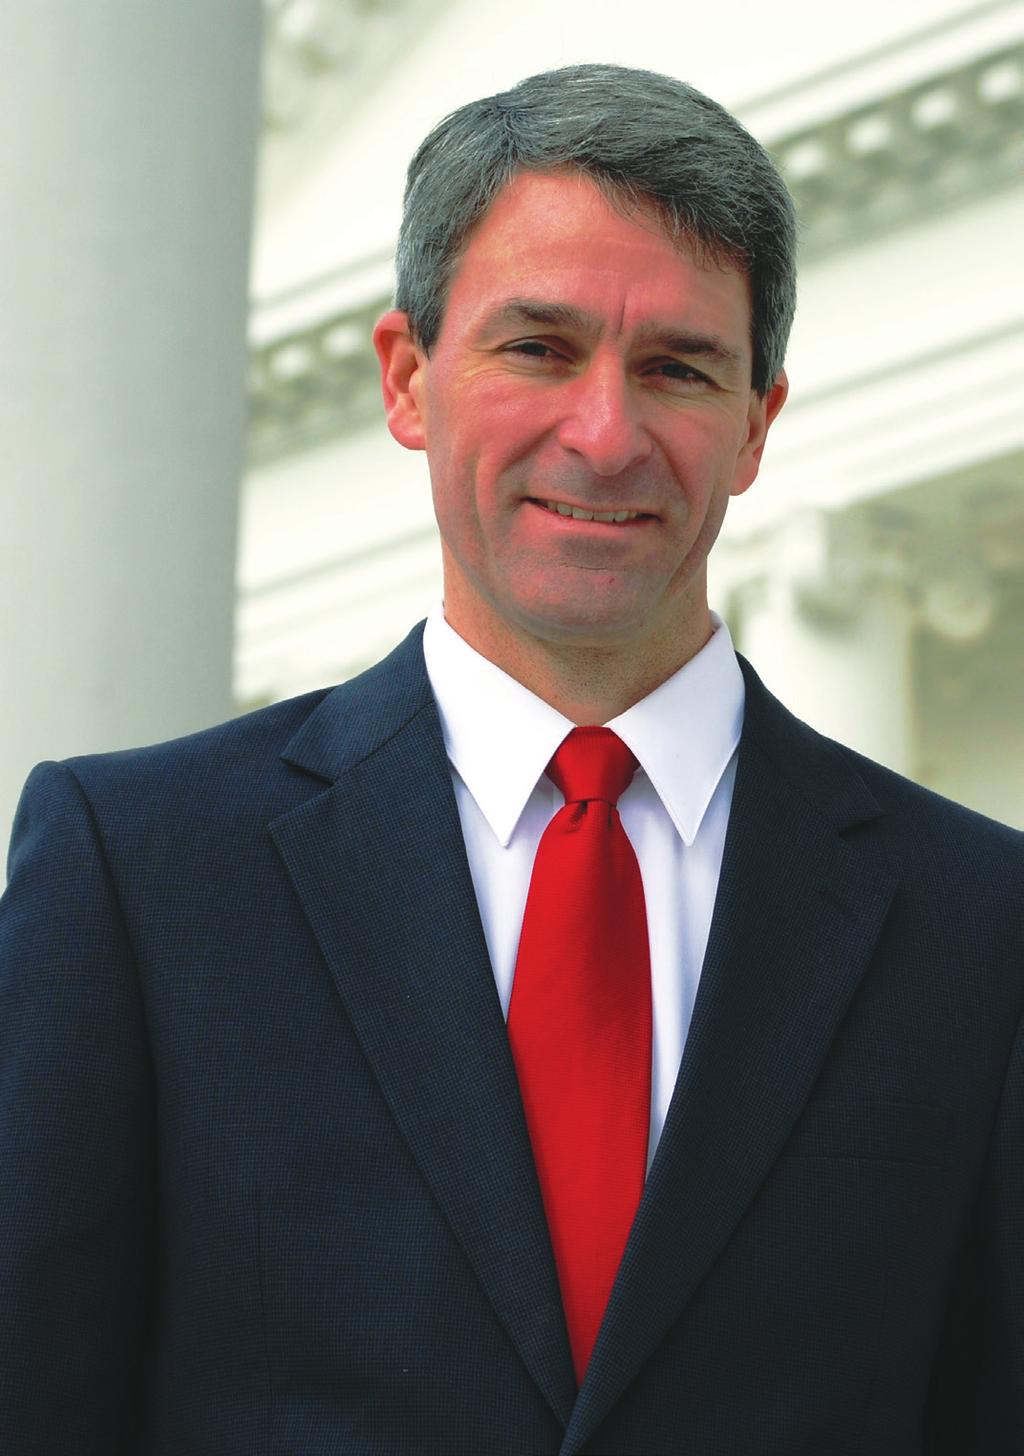 My CONVERSATION With Ken Cuccinelli I was delighted to speak with the courageous Ken Cuccinelli, Virginia Attorney General and candidate for Governor instrumental in the legal fight against Obamacare